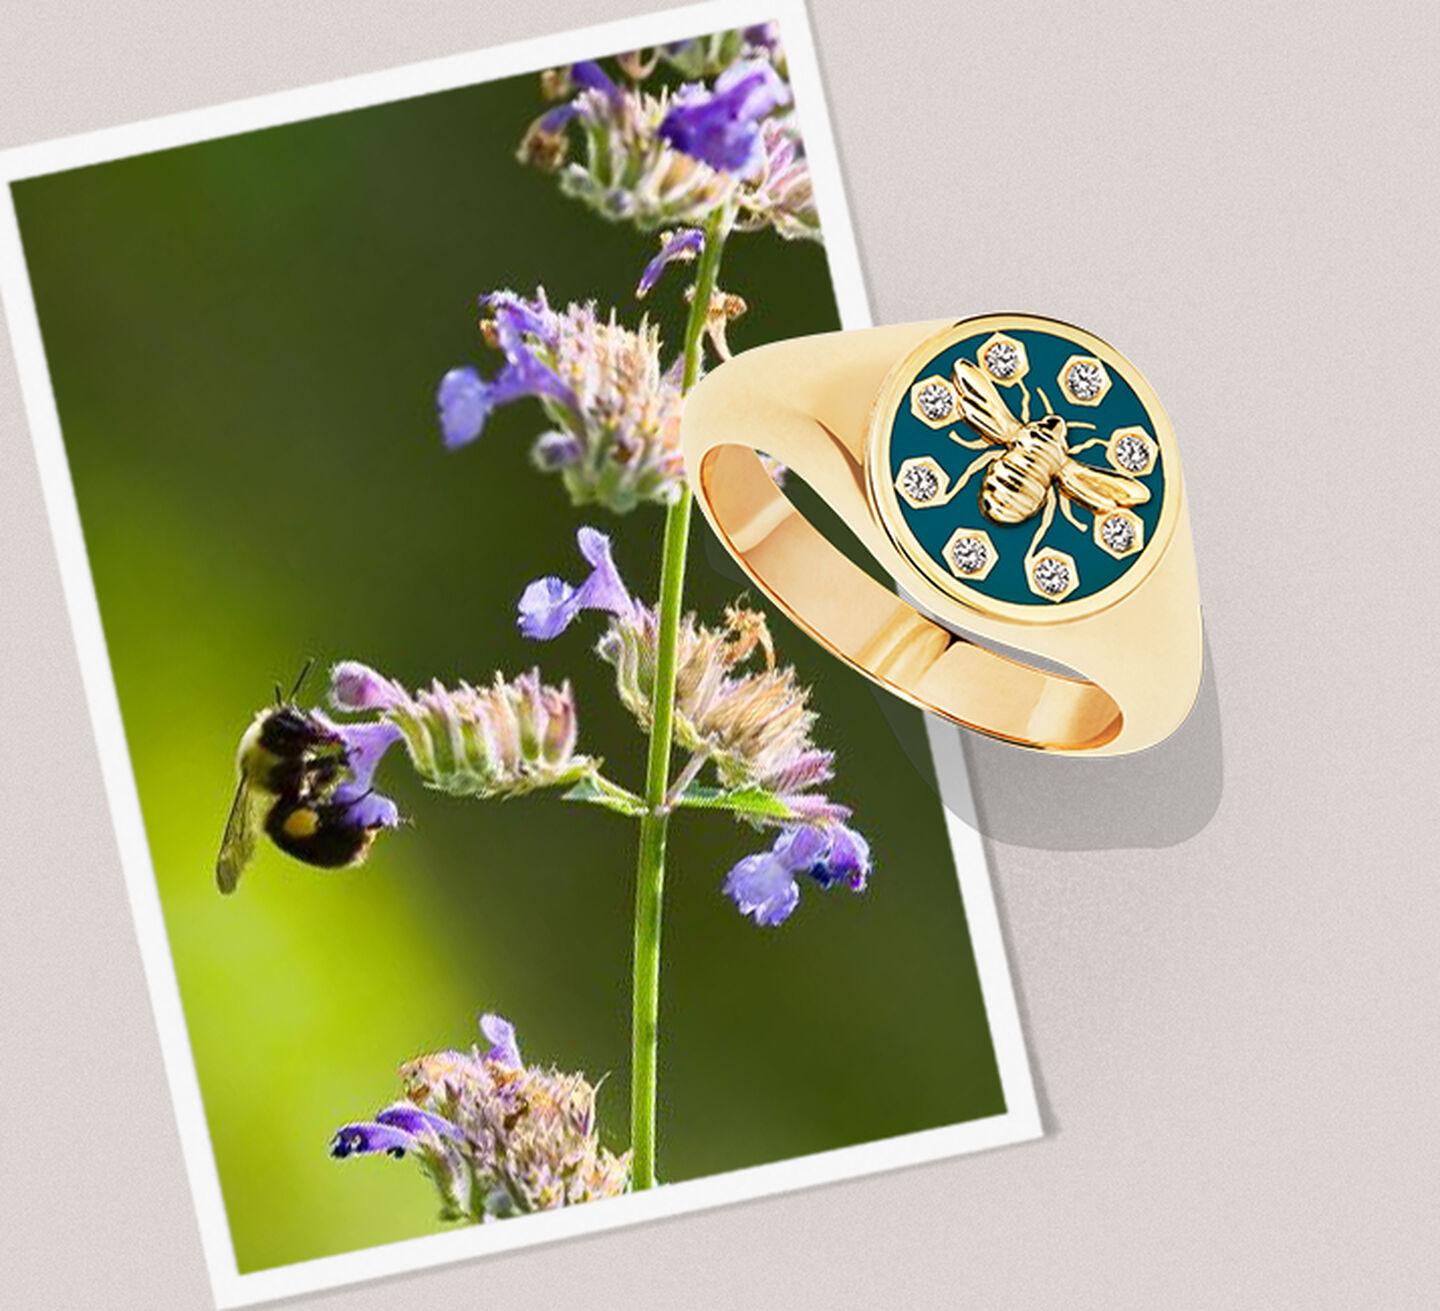 A gold ring with diamonds and a gold bee sits on a photo of a bee on a purple flower.